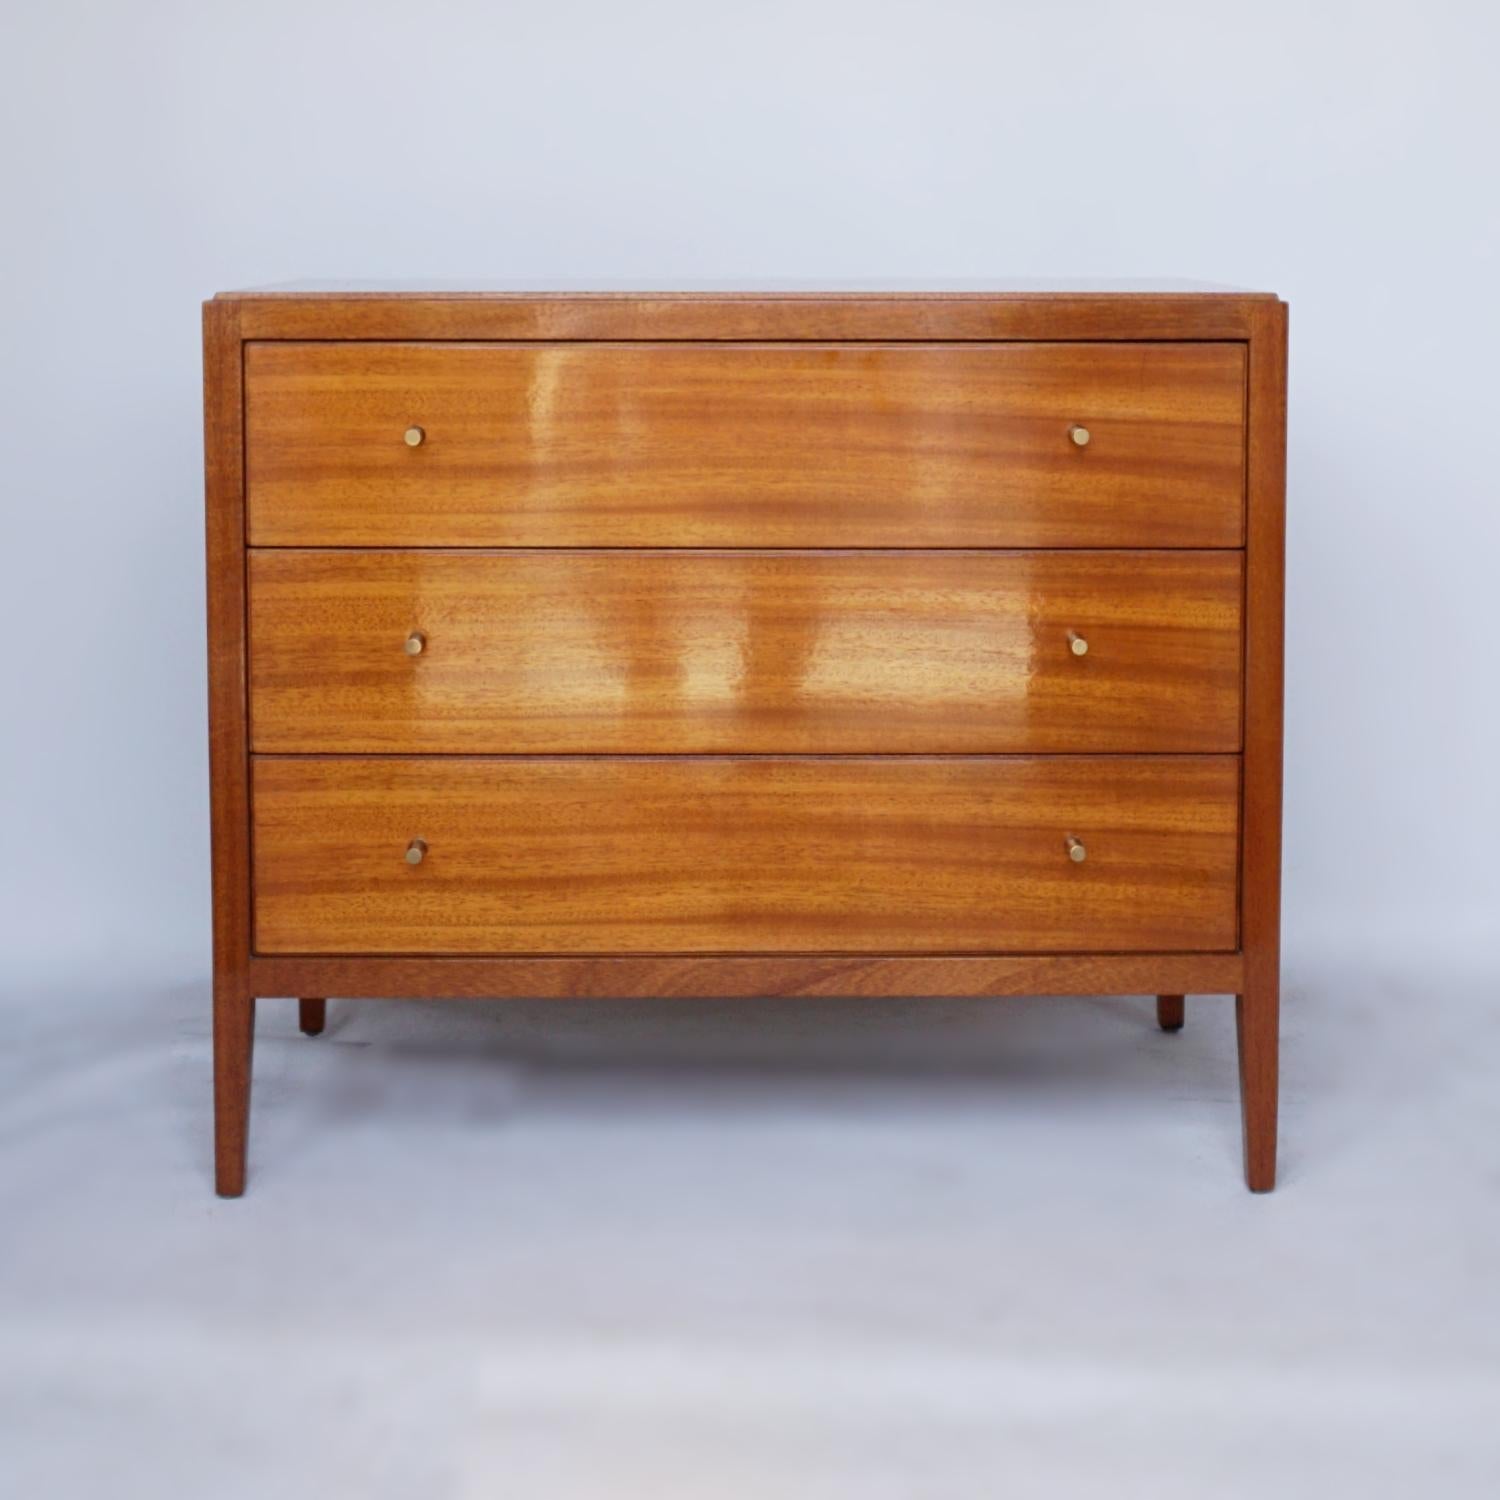 A mid-century low chest of three drawers designed by Neville Ward and Frank Austin for Loughborough Furniture, and retailed by Heal's of London. Figured olive walnut throughout with original metal handles. 

Dimensions: H 72cm, W 84cm, D